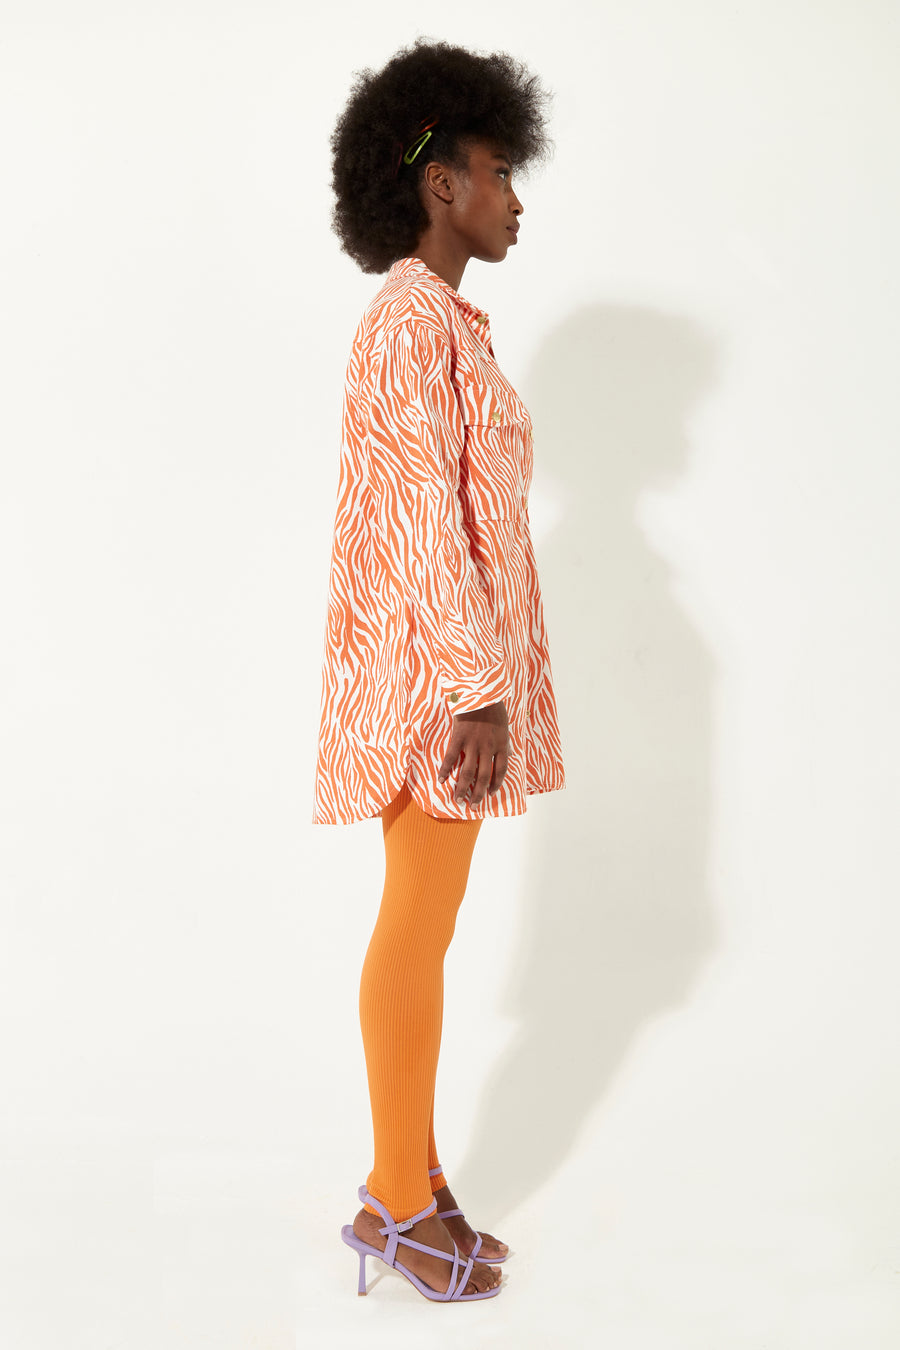 House of Holland Orange zebra oversized shirt with gold buttons